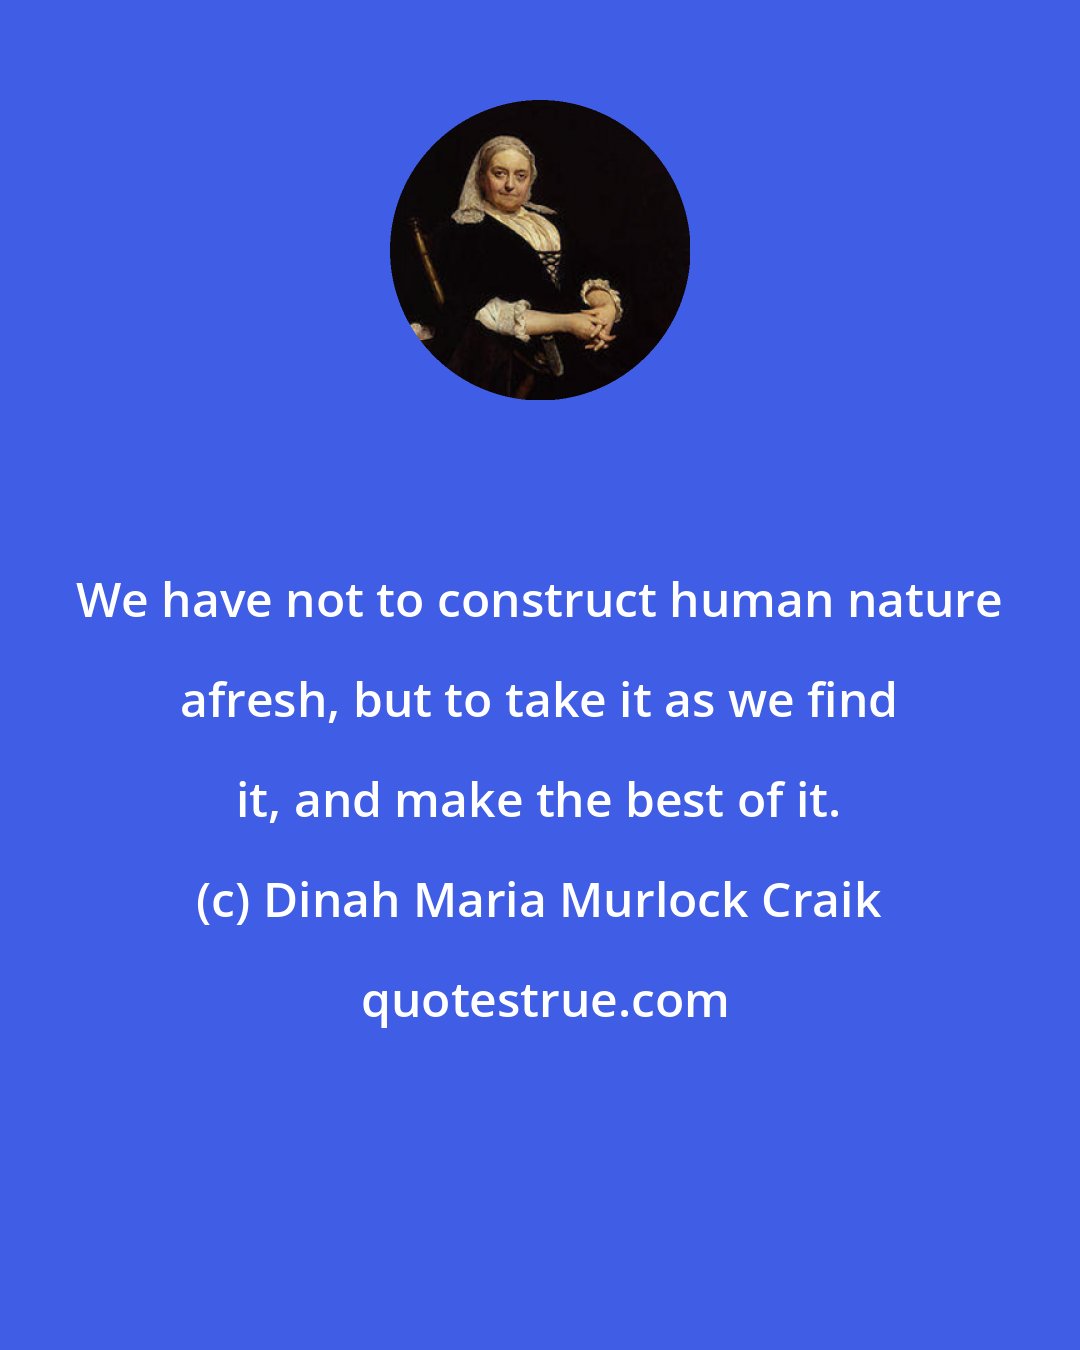 Dinah Maria Murlock Craik: We have not to construct human nature afresh, but to take it as we find it, and make the best of it.